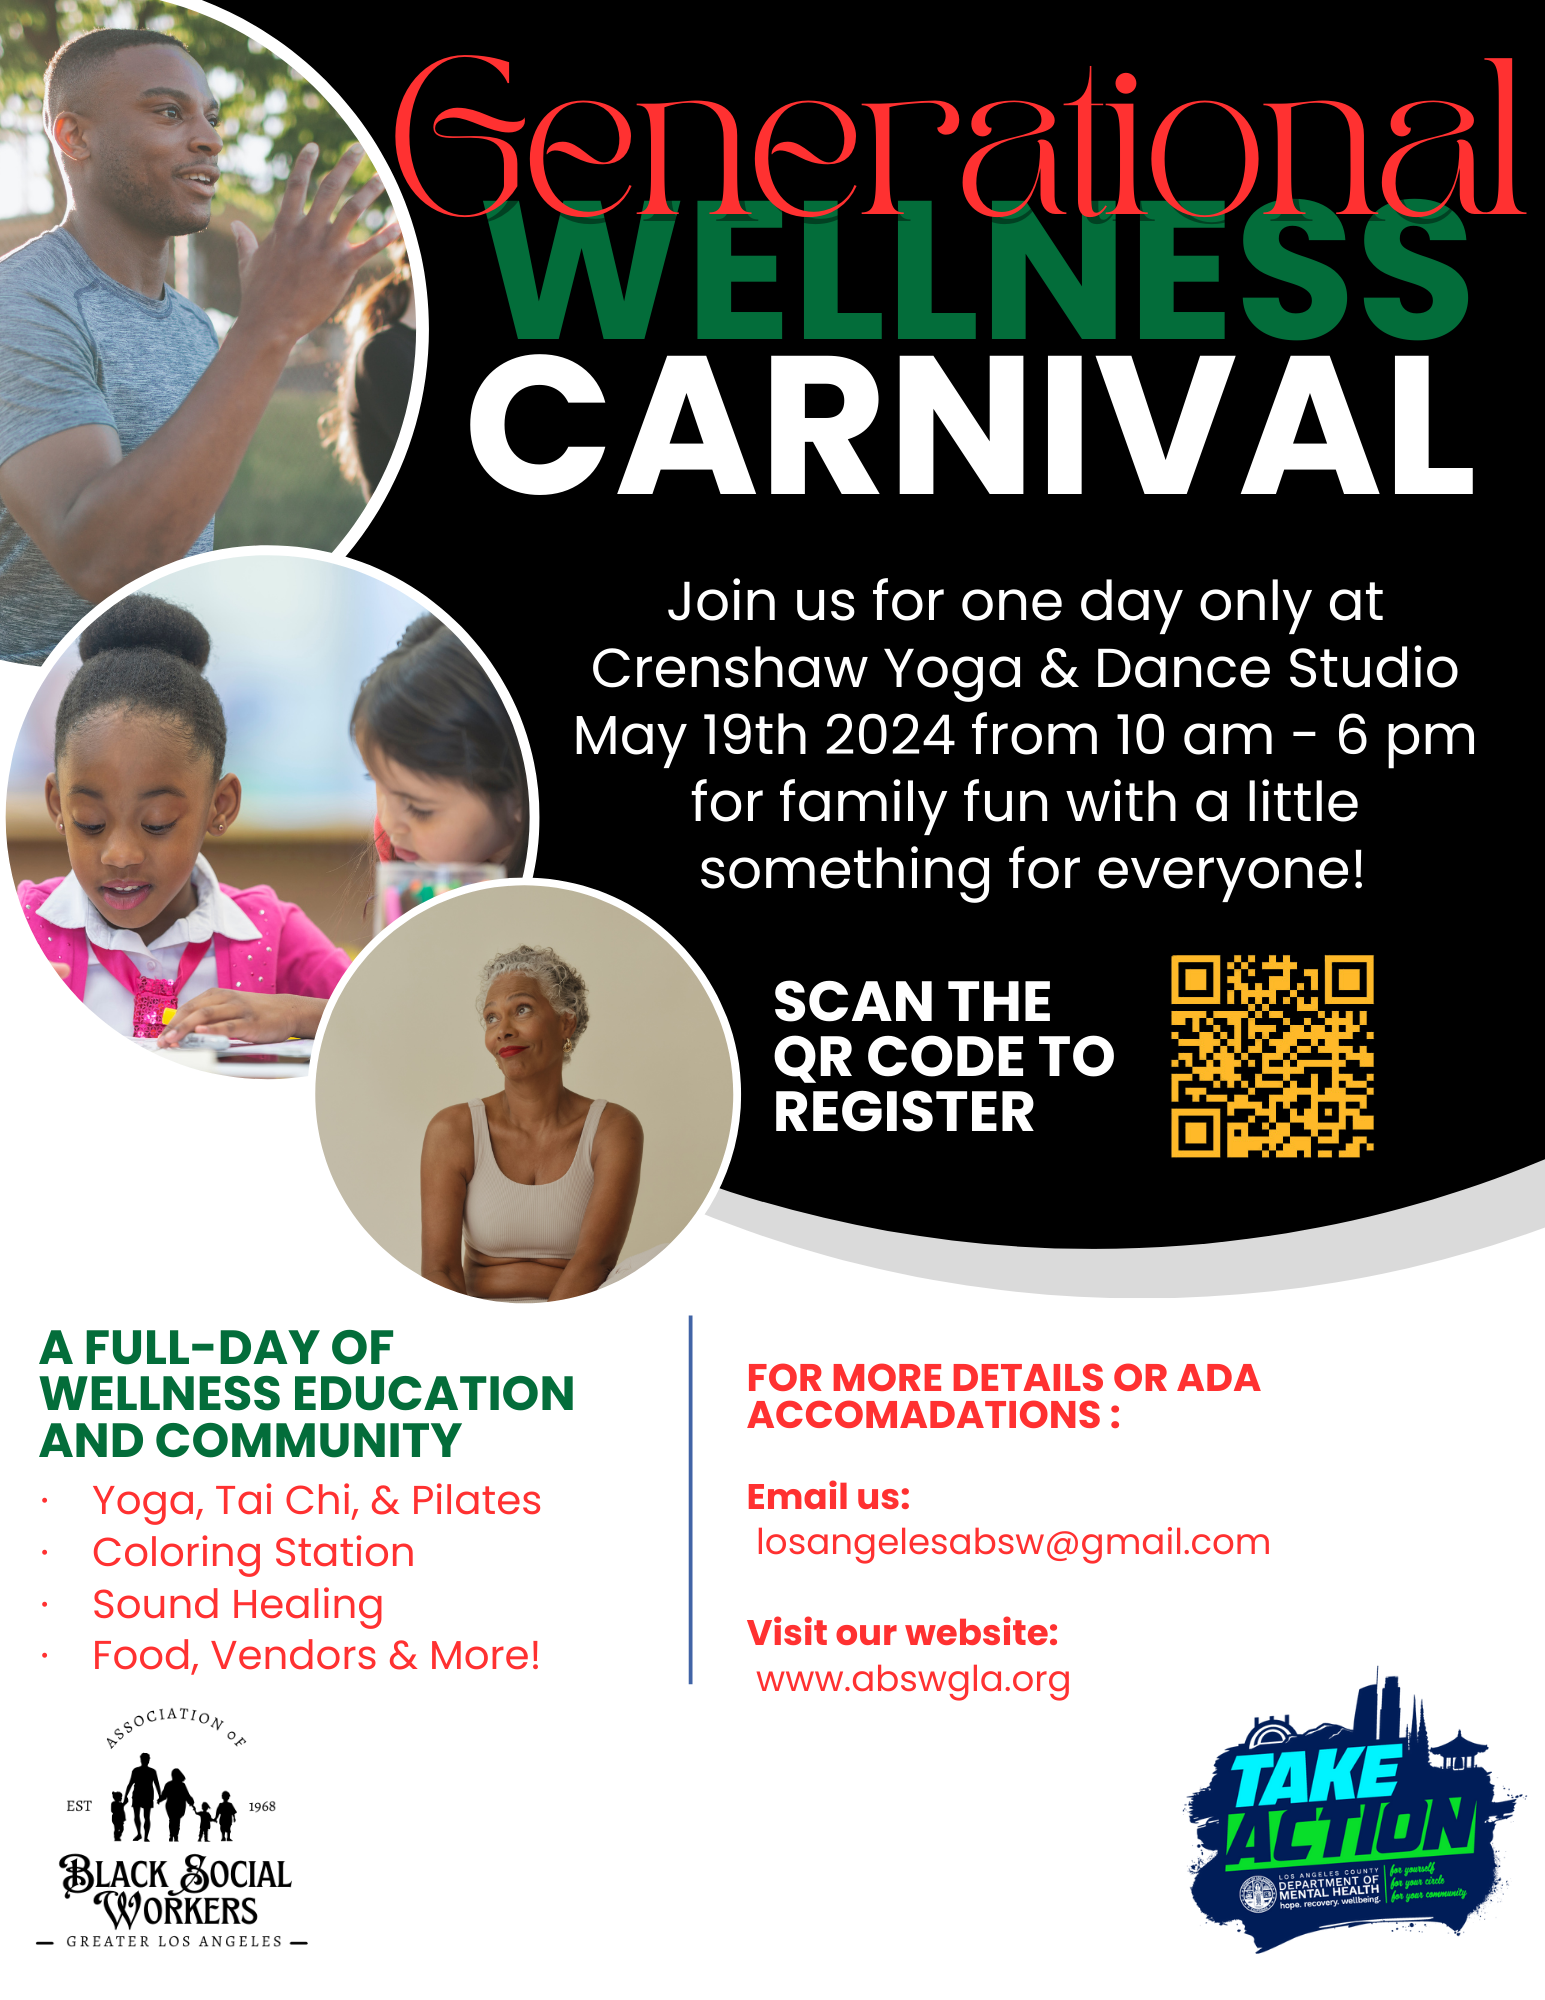 Wellness Event Sunday, May 19th.  Join the full day of Wellness, Education & Community.